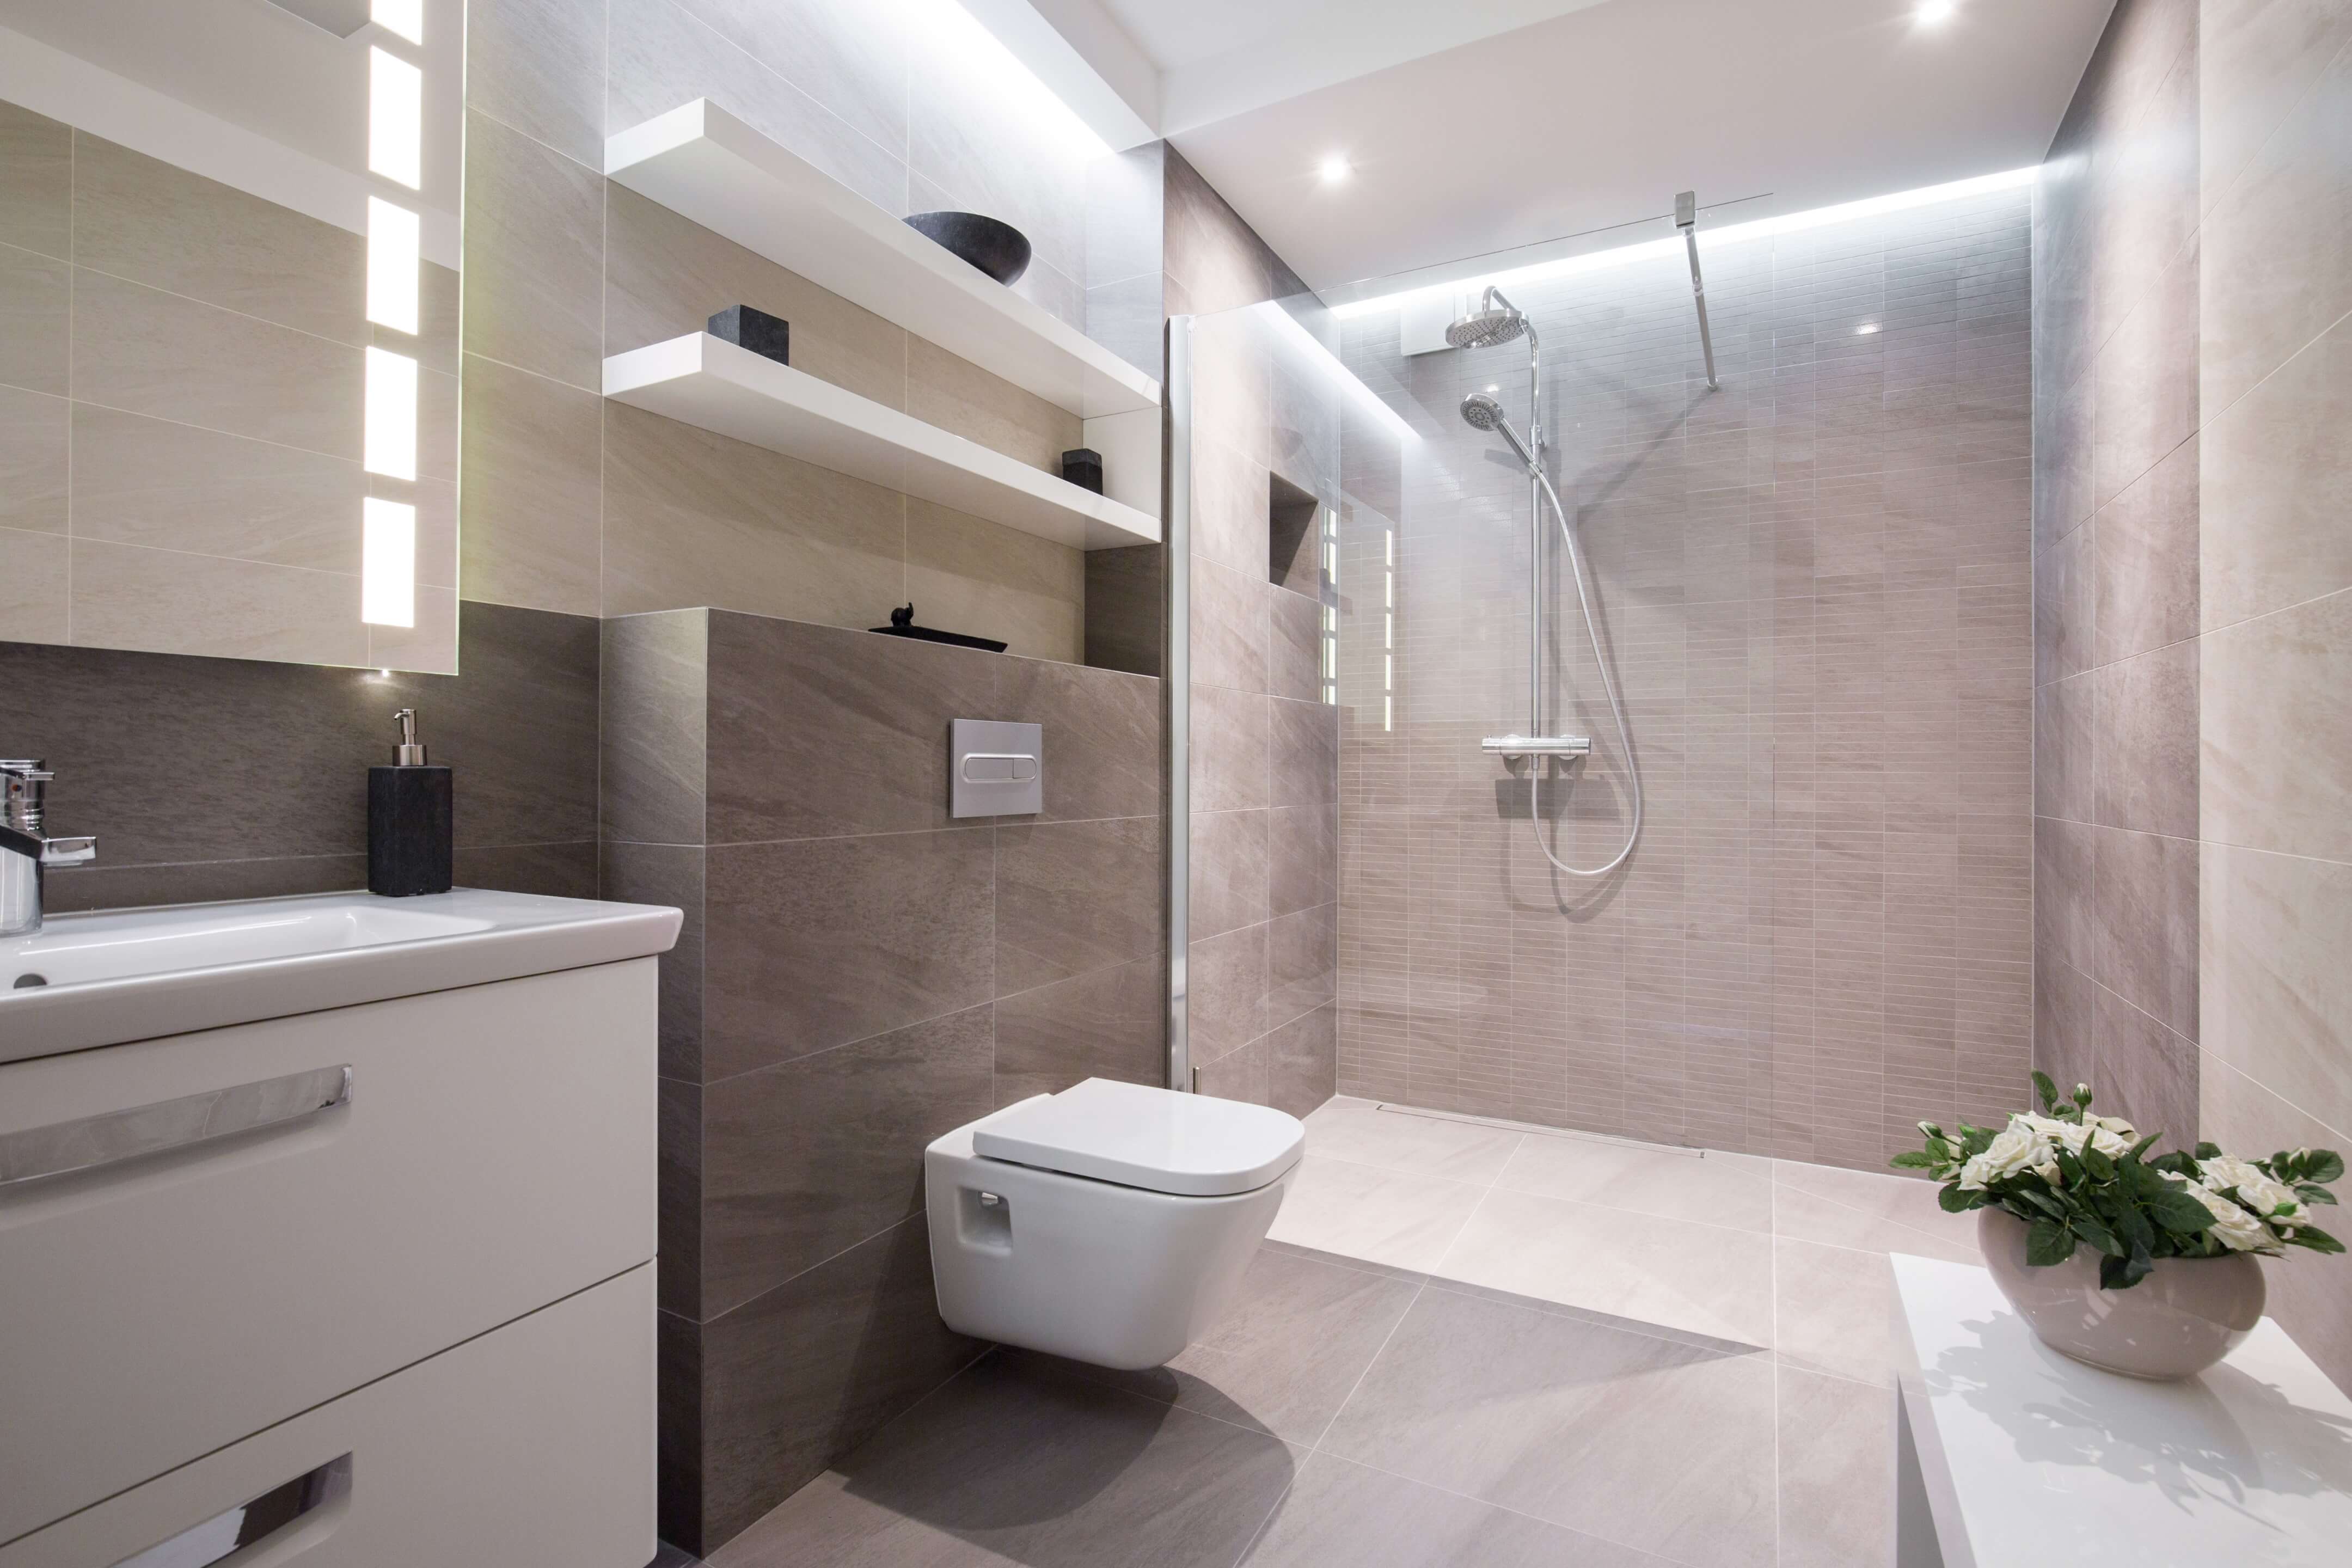 local bathroom fitters chelsea